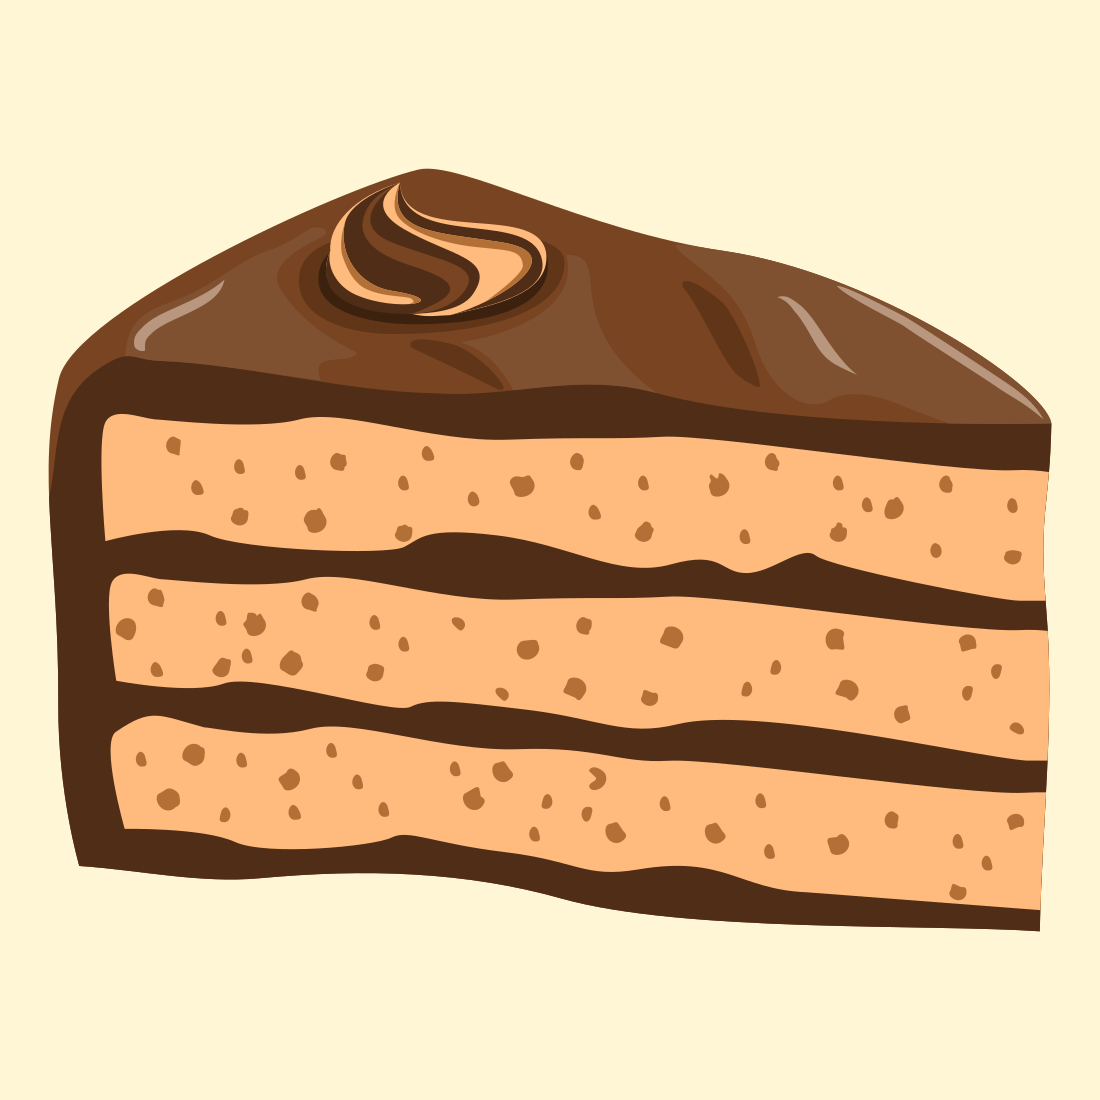 Chocolate Cake Vector Graphic Illustration preview image.